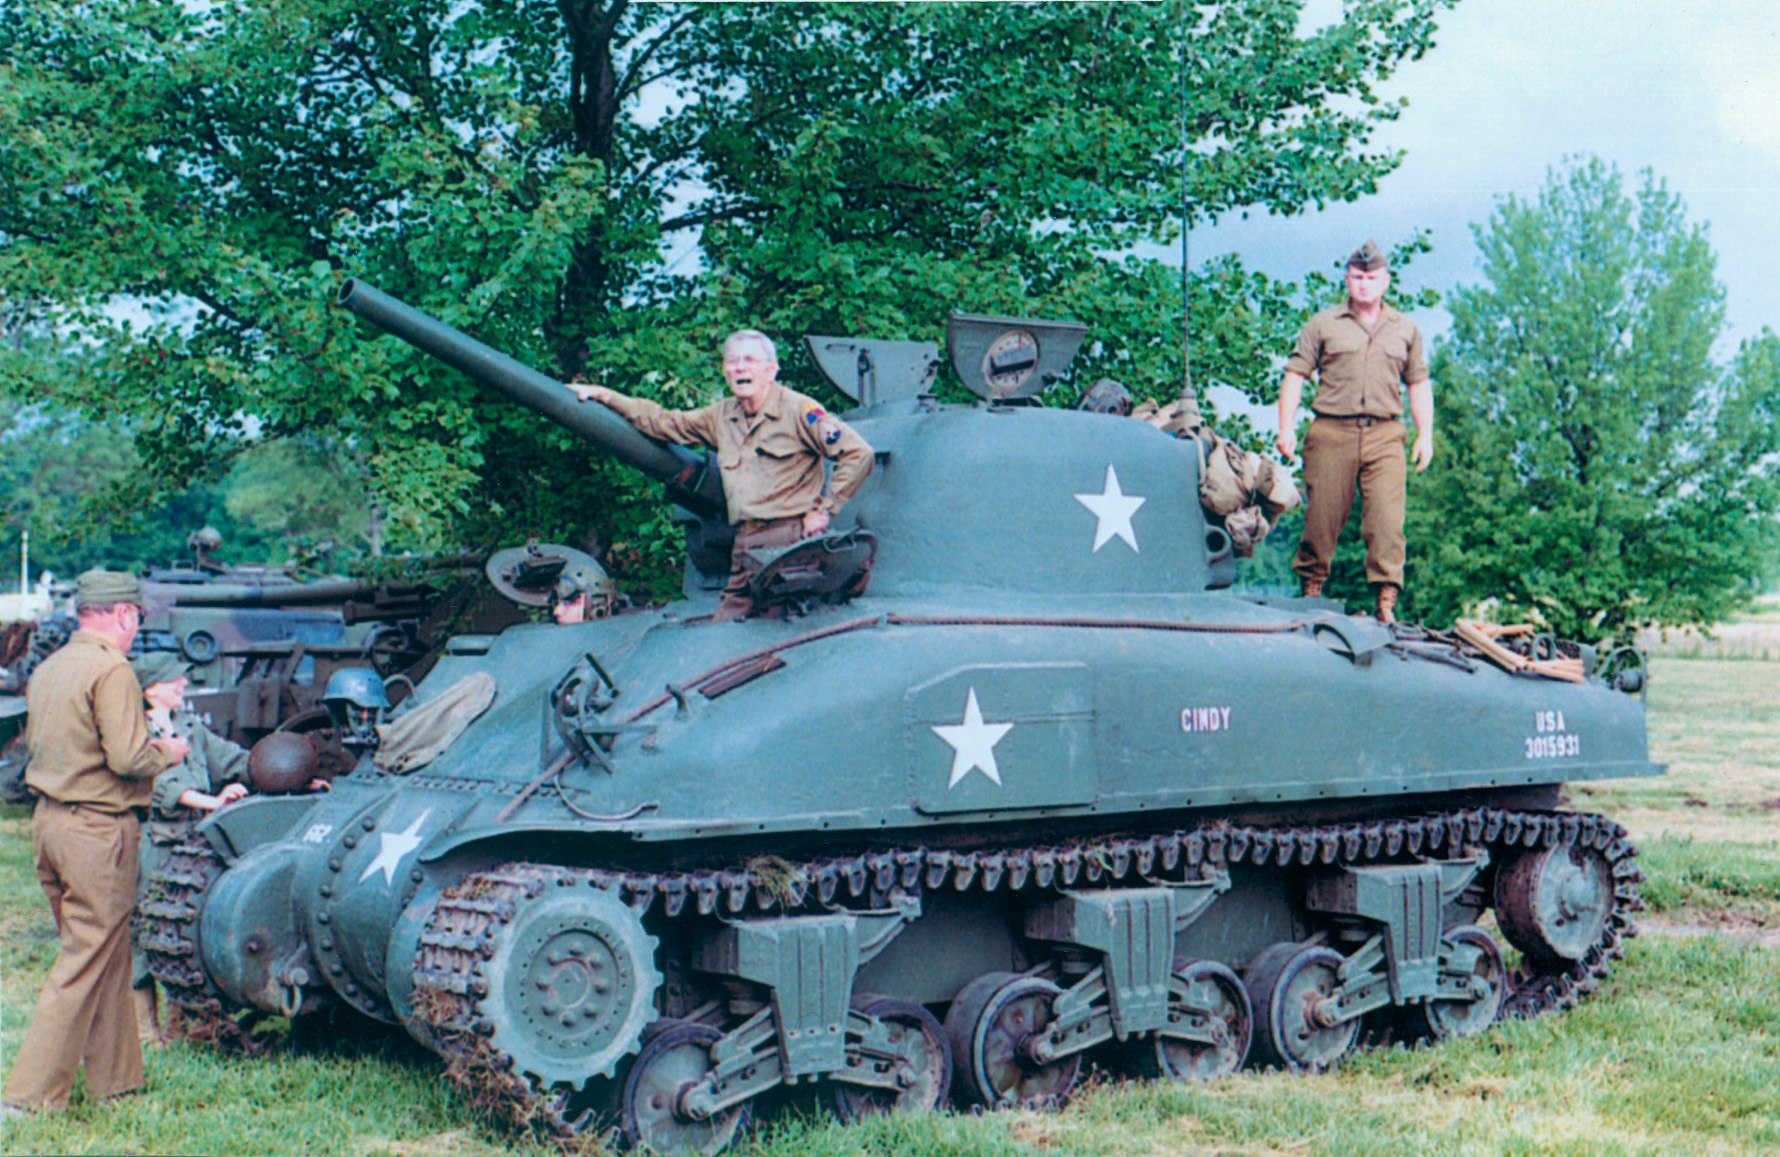 Patton, cavalry,  and armor come together at Fort Knox as they came together in life, three forces that will forever be linked.  The Patton Museum is a rich collection of the man, horse warriors, and tanks.